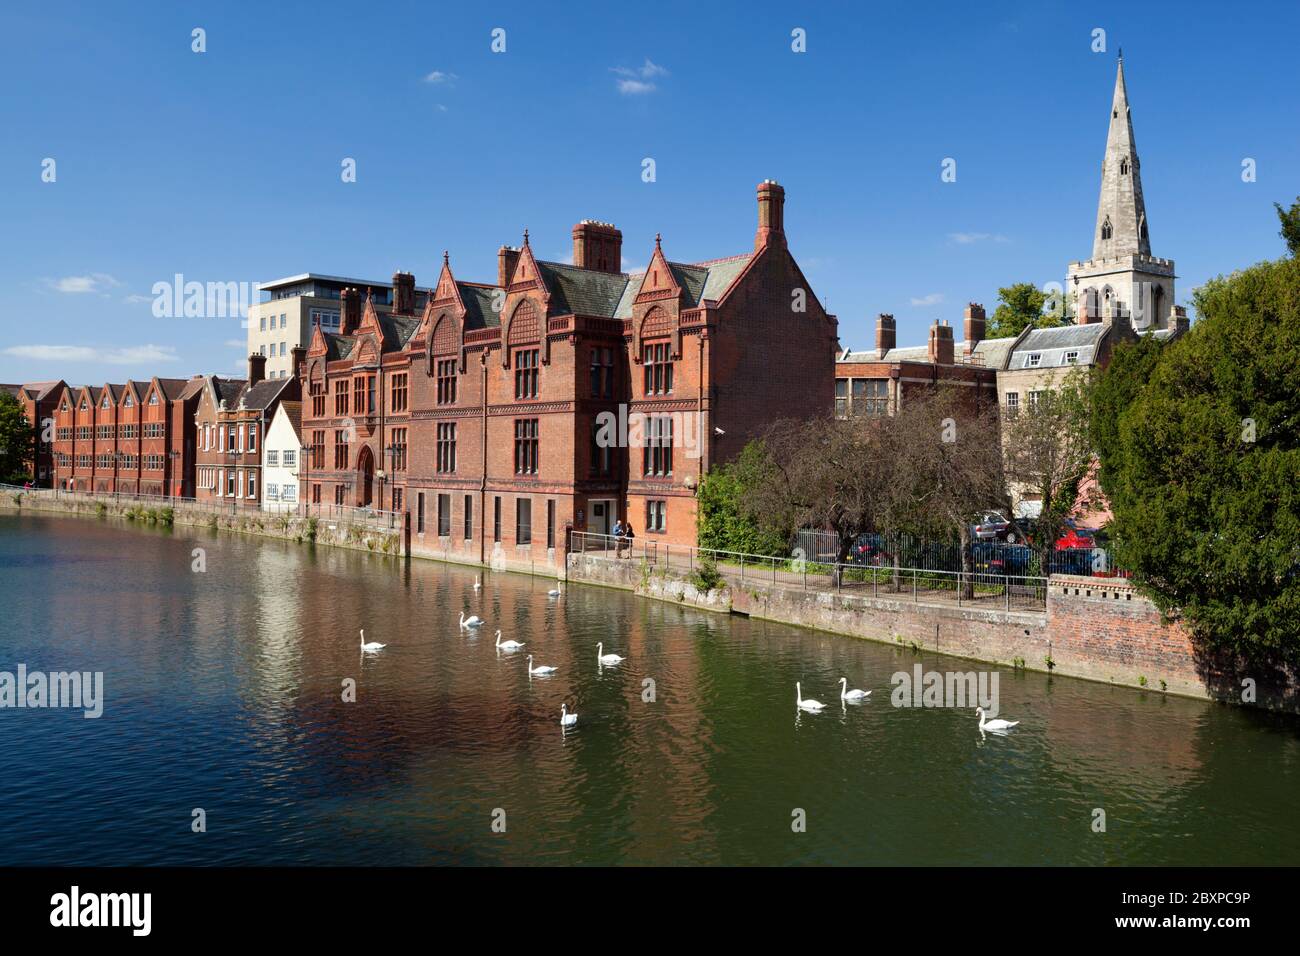 Church of St Paul and Bedford Magistrates Court beside River Great Ouse, Bedford, Bedfordshire, England, United Kingdom, Europe Stock Photo